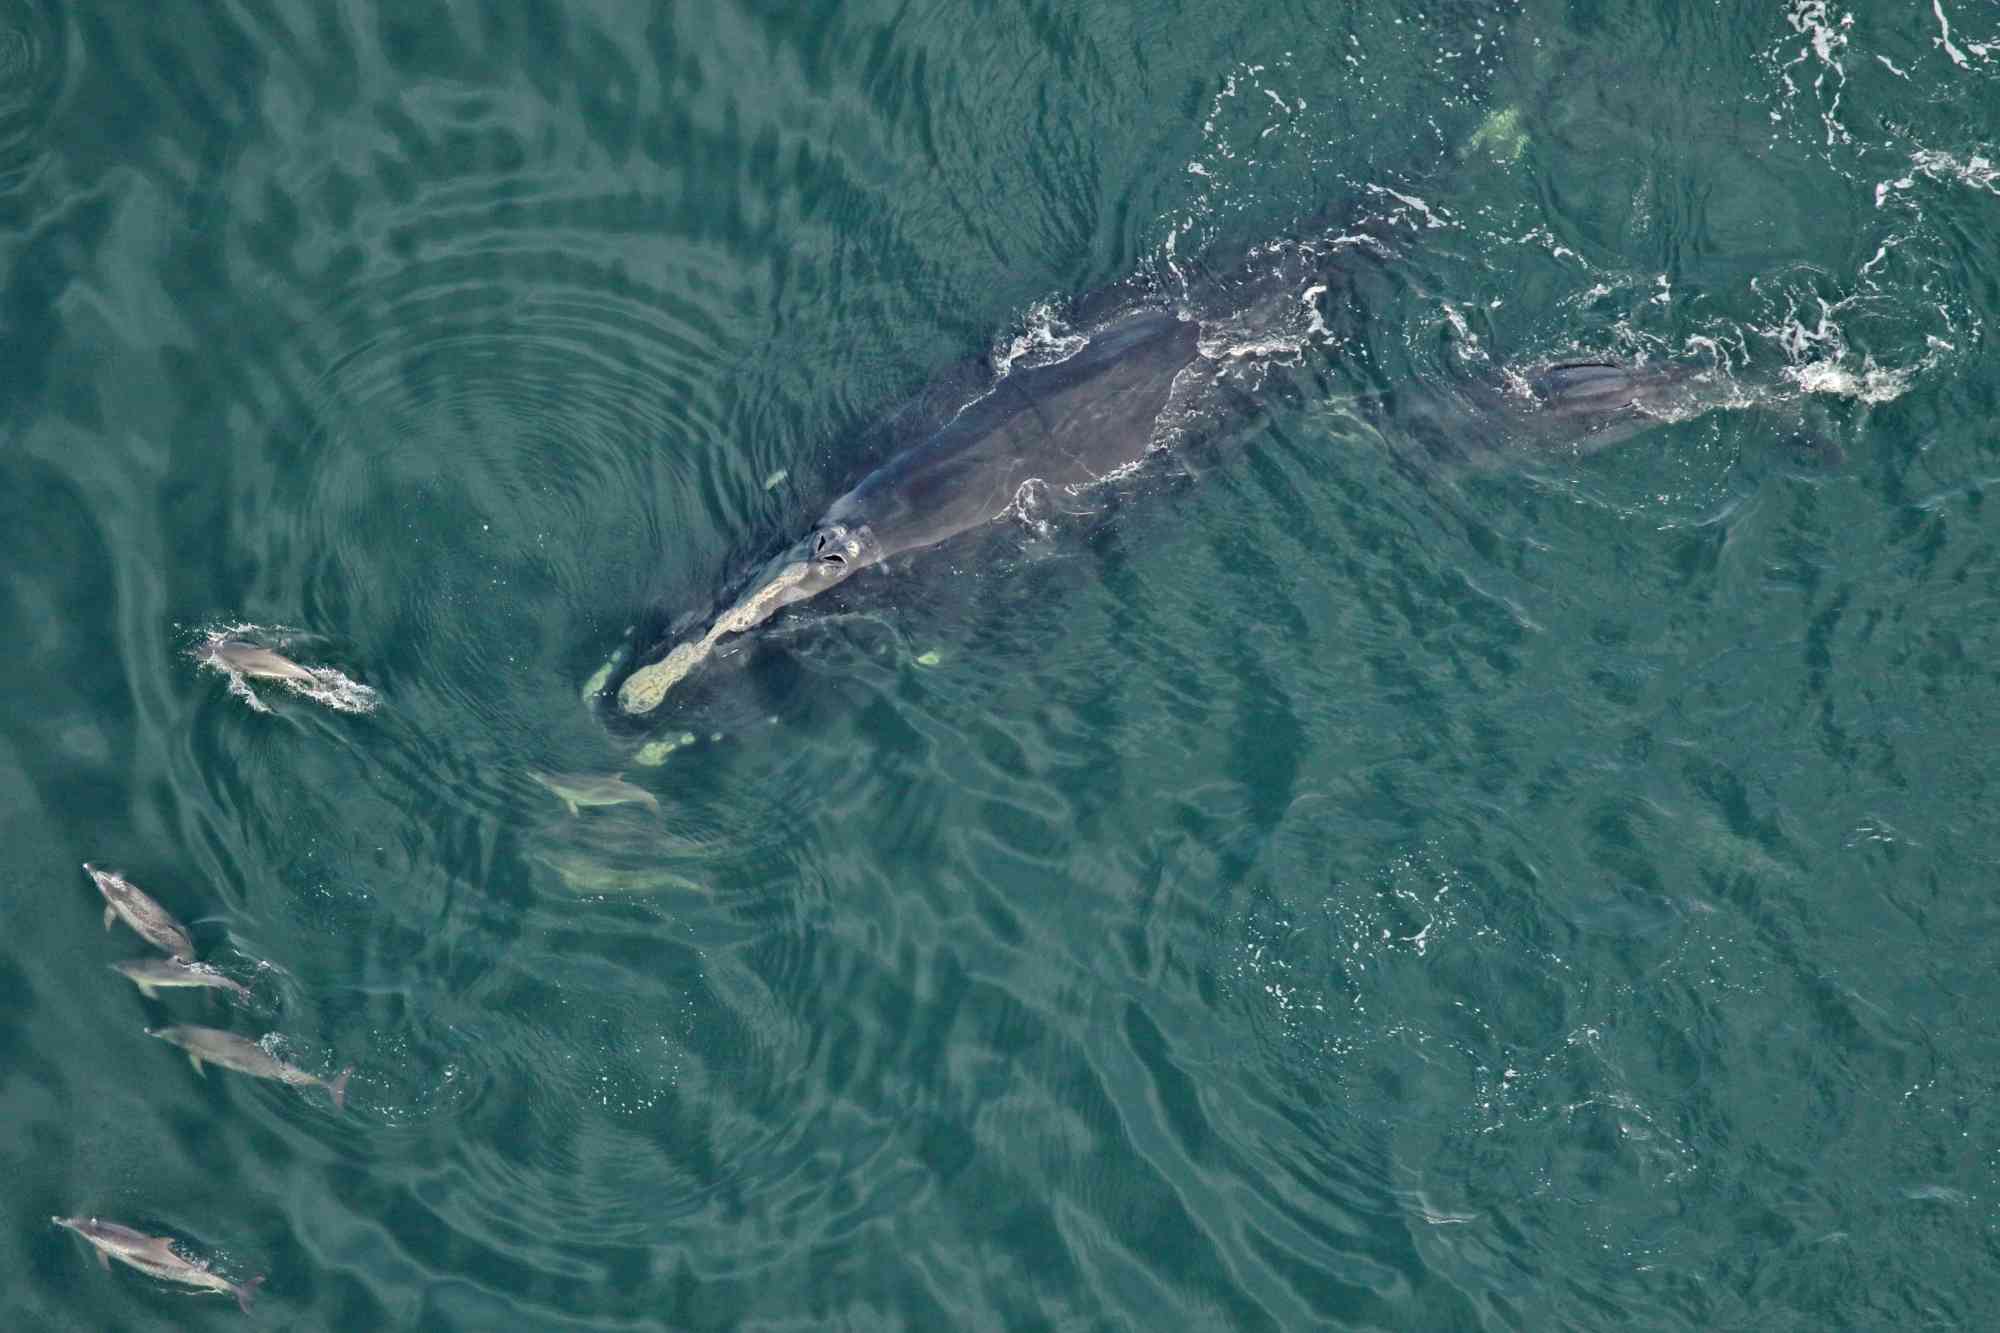 2023.01.05-Right Whale and Calf with Spotted Dolphin-FWC-CC BY NC ND 2.0